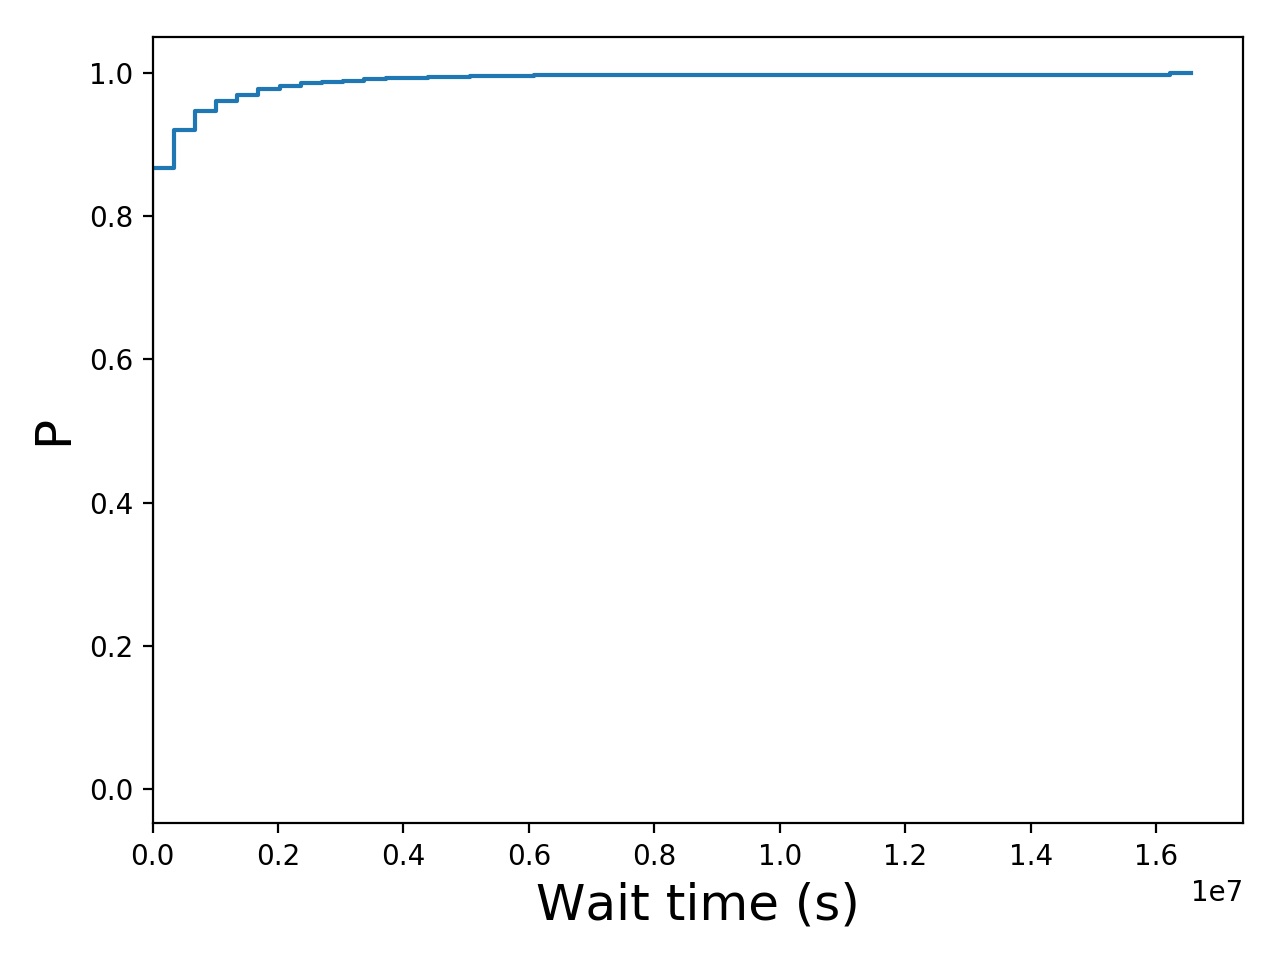 Task wait time CDF graph for the askalon_ee trace.